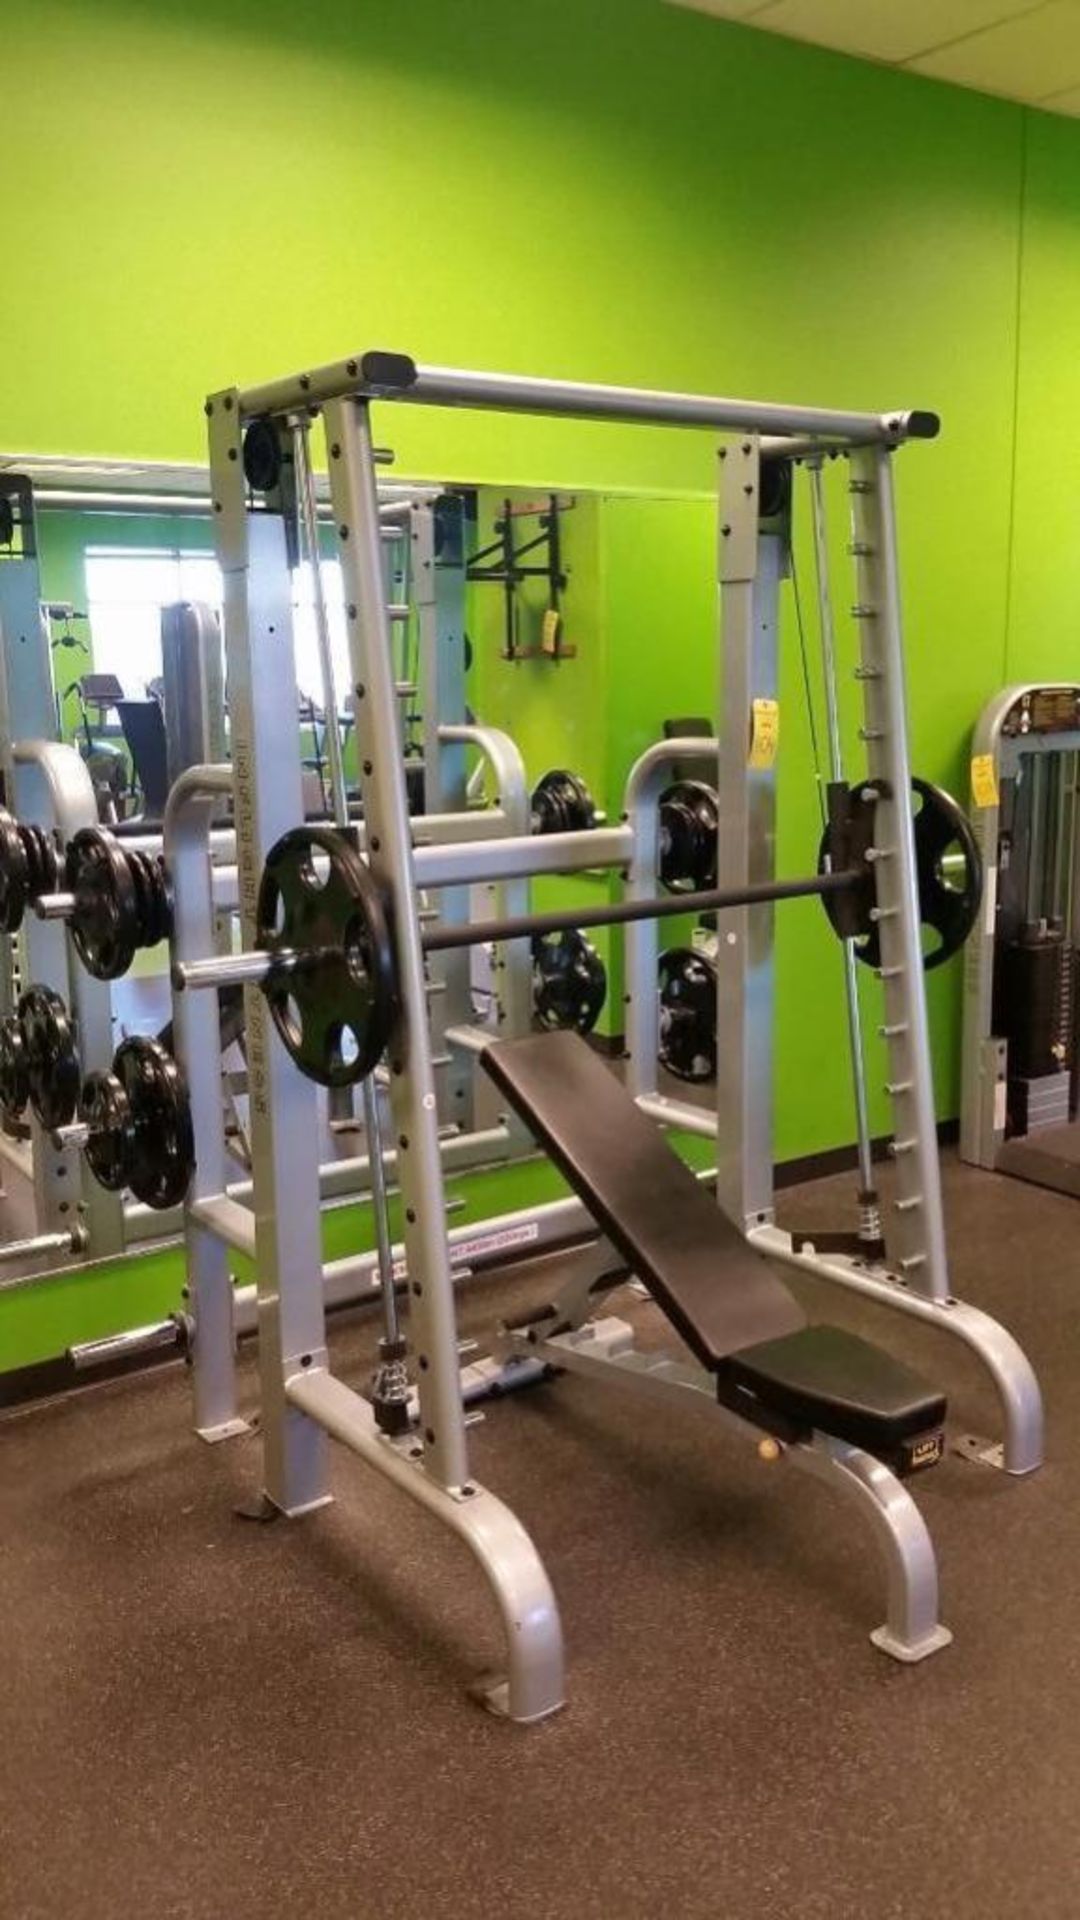 Inflight Counterbalanced Smith Machine (this lot is located at 737 N 5th Street, Richmond, VA)